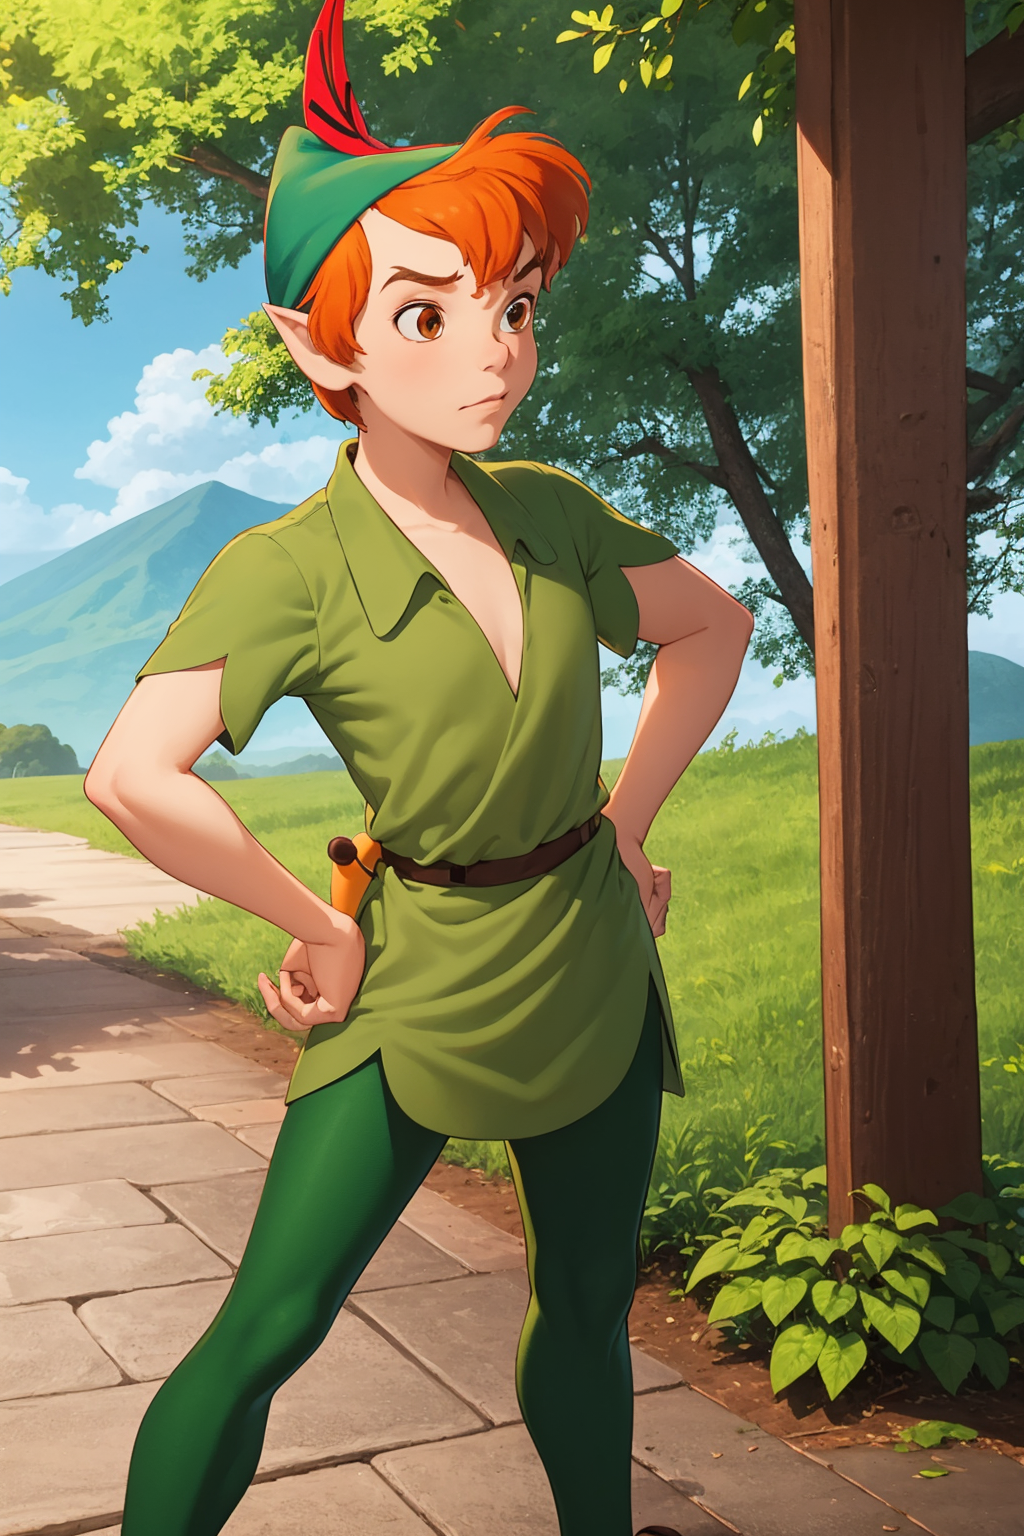 A cartoon image of a boy in a green shirt and green pants holding a bow and arrow.